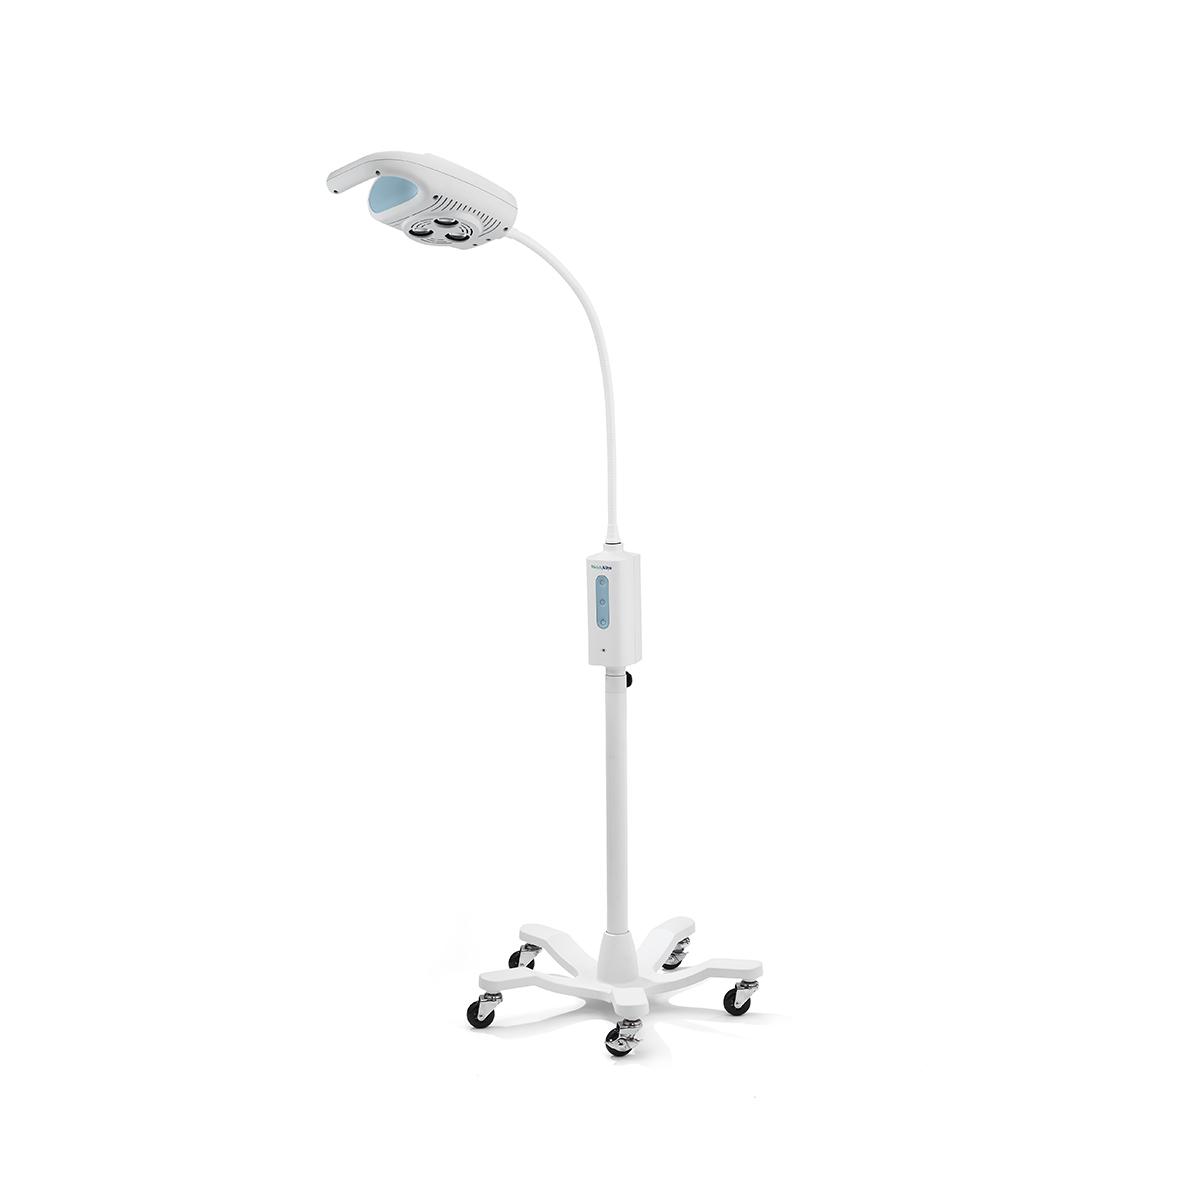 Green Series 600 Veterinary Minor Procedure Light on mobile stand with wheels, left facing